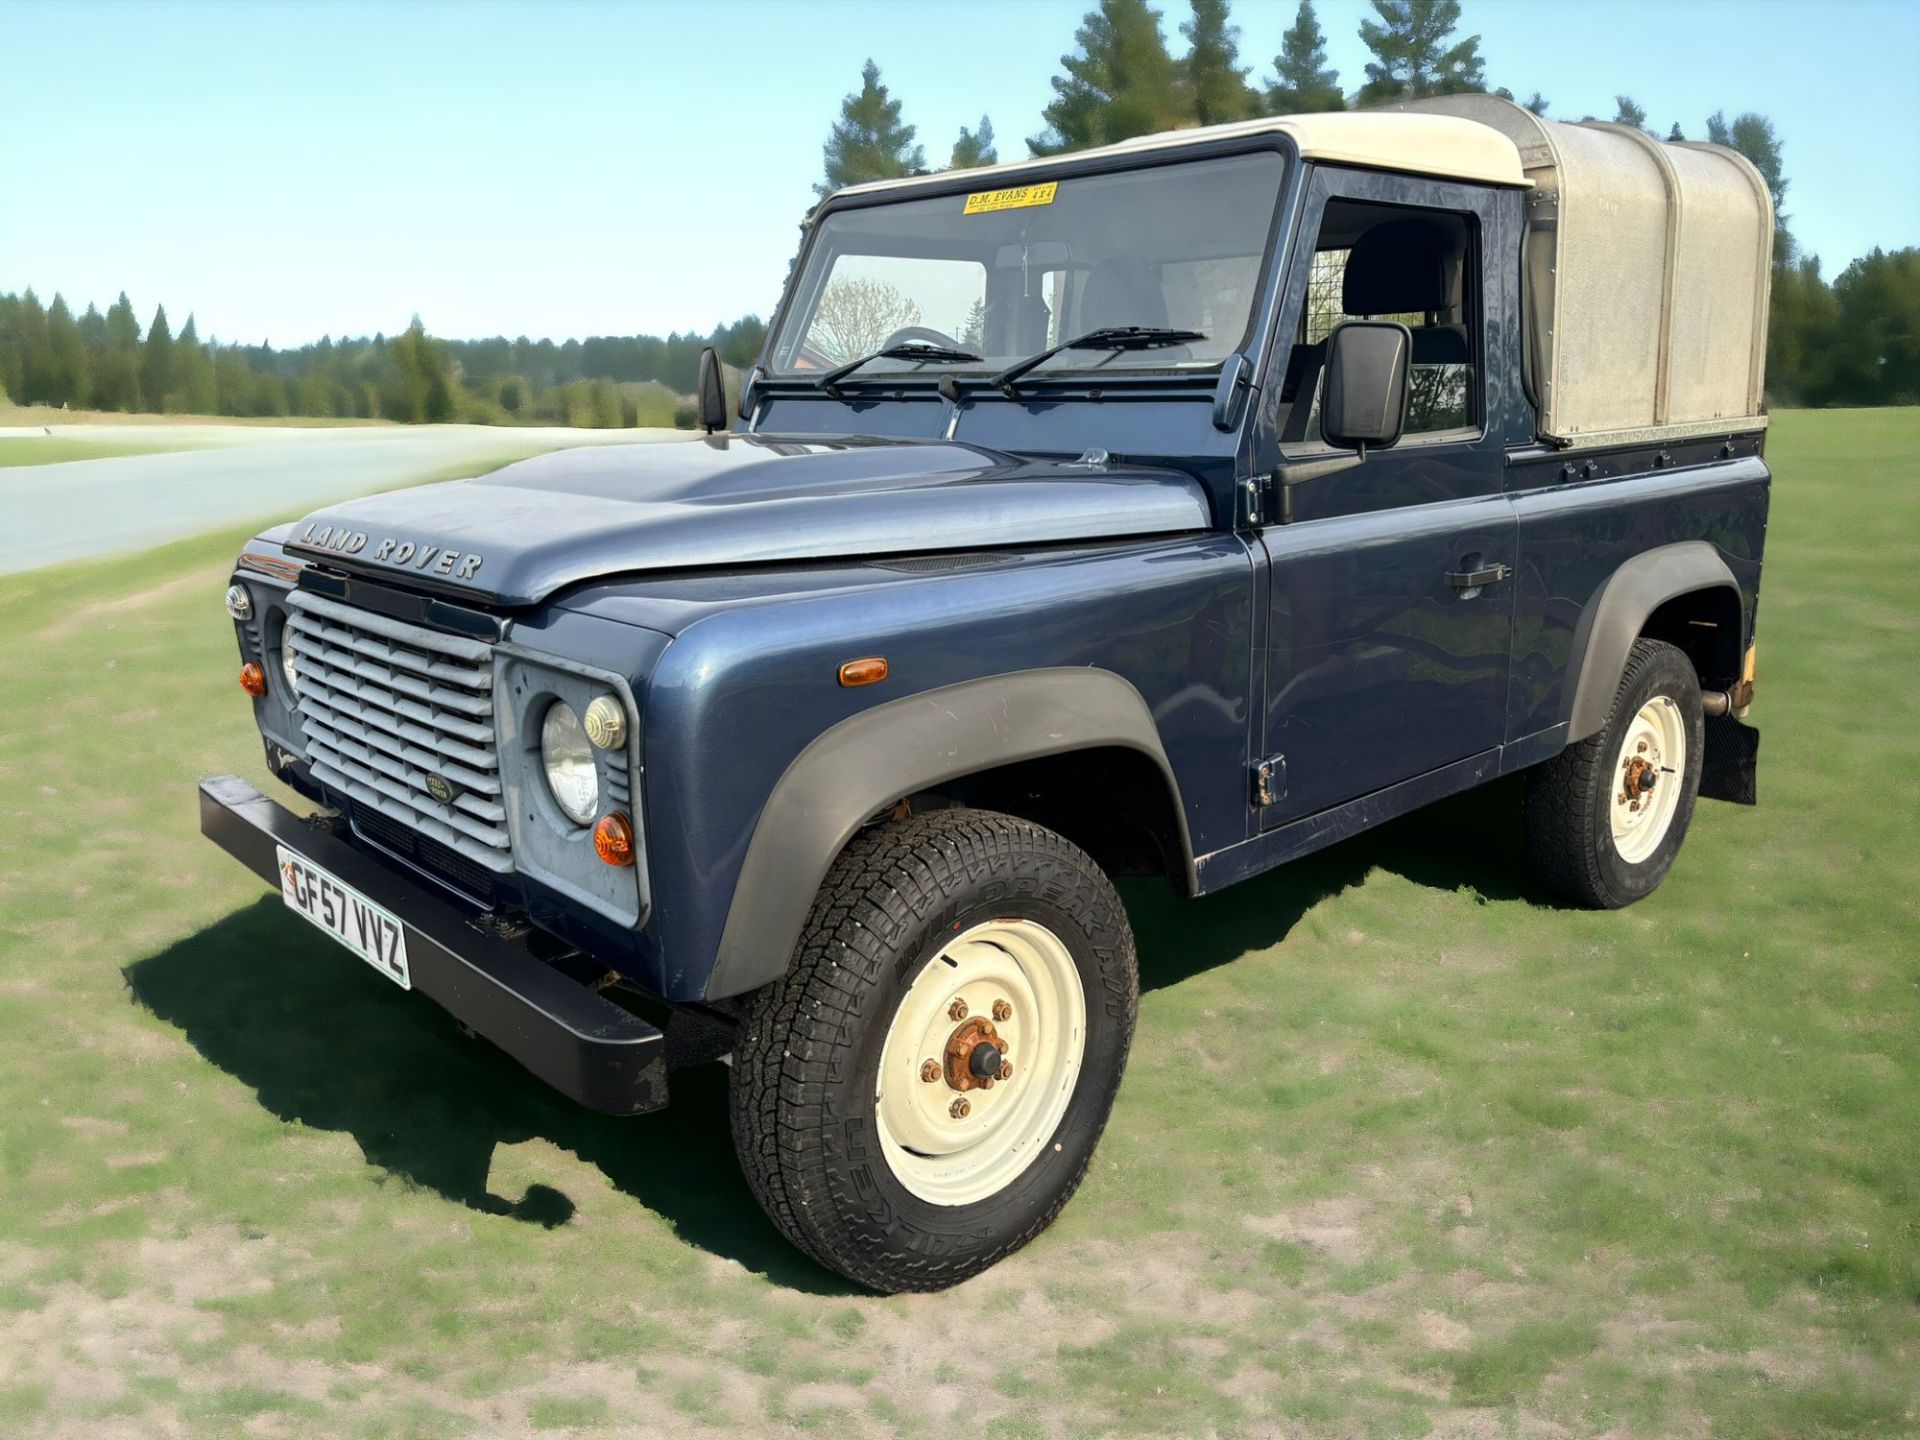 UNLEASH YOUR ADVENTUROUS SPIRIT WITH THE 2008 LAND ROVER DEFENDER 90 TRUCK TDCI